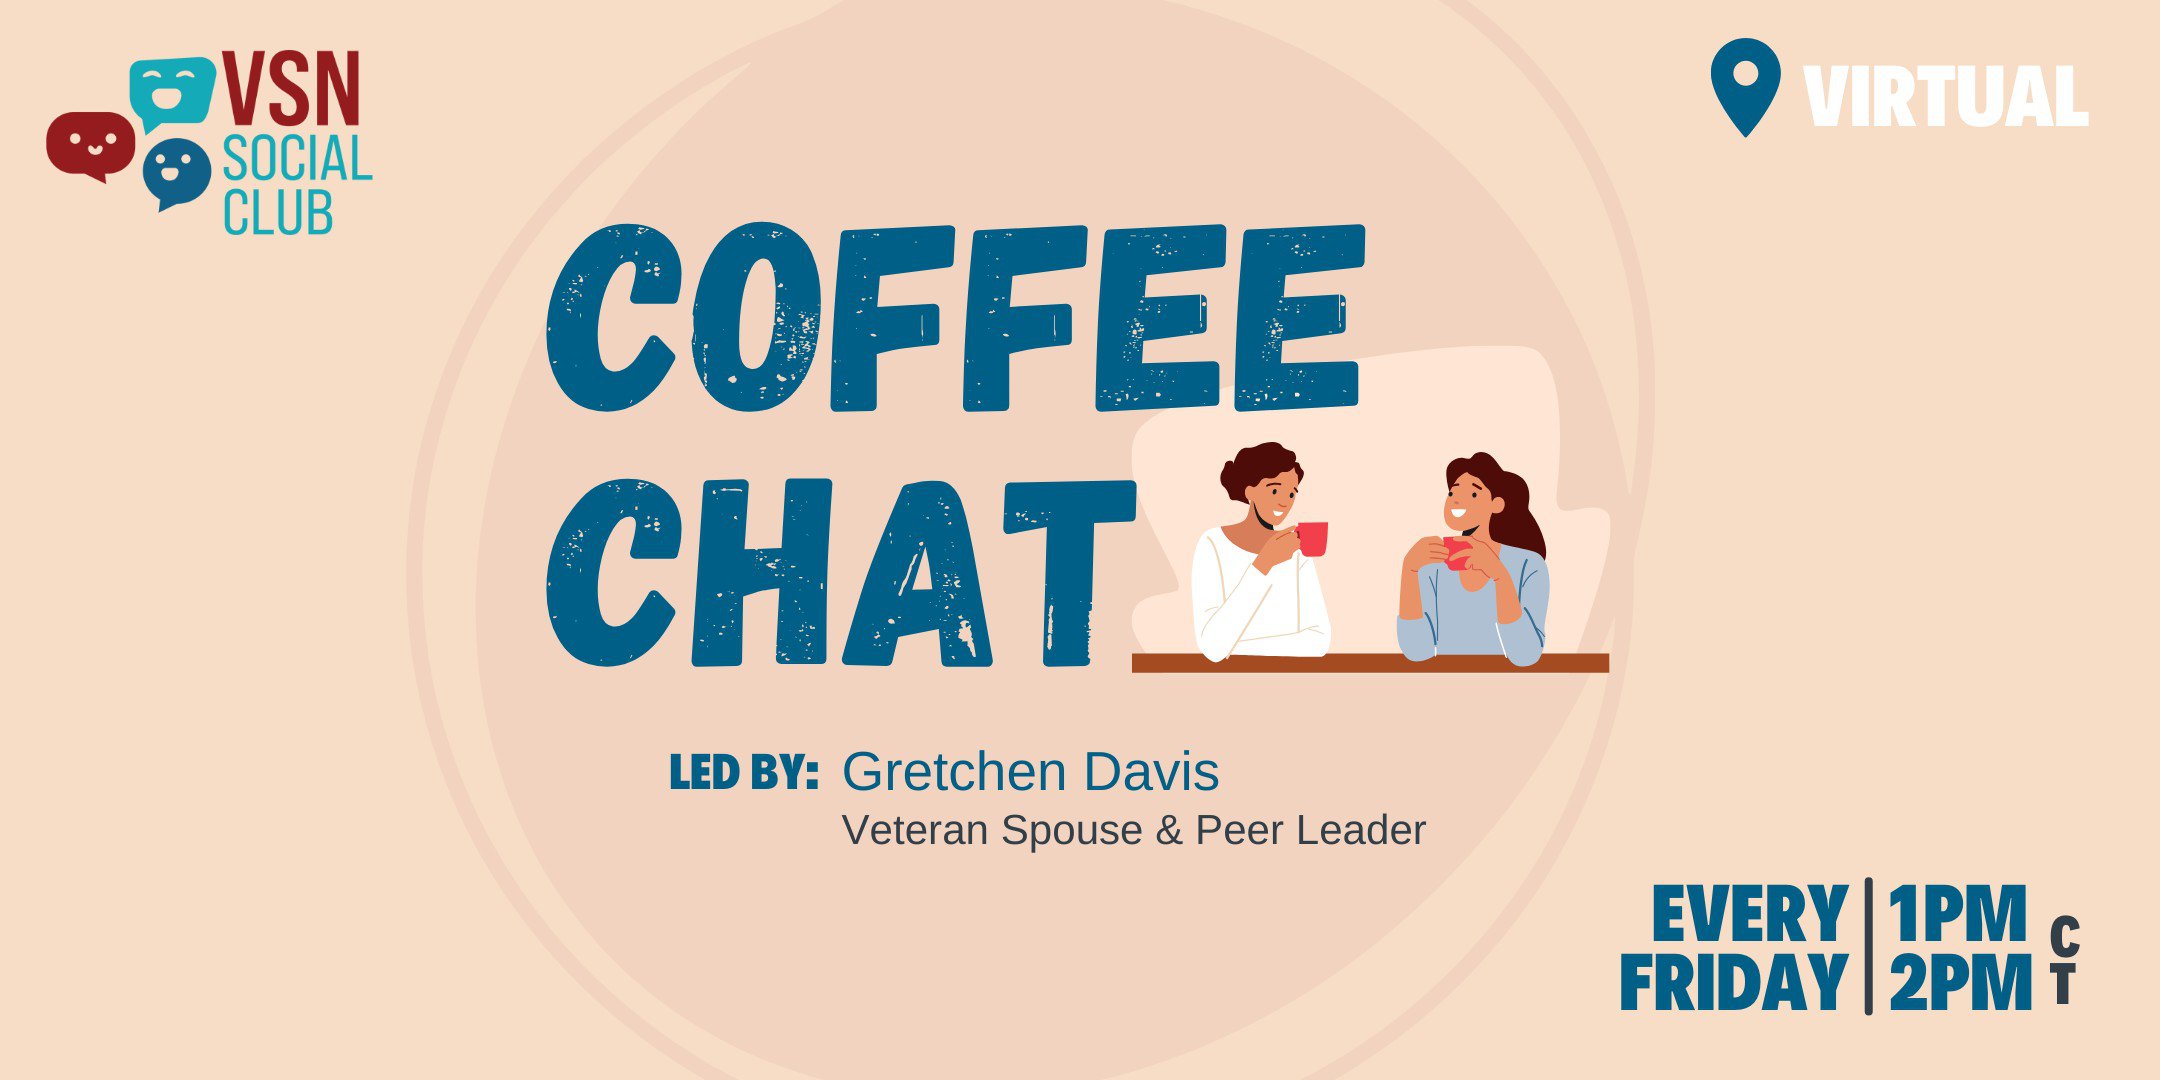 Coffee Chat every Friday with Gretchen Davis